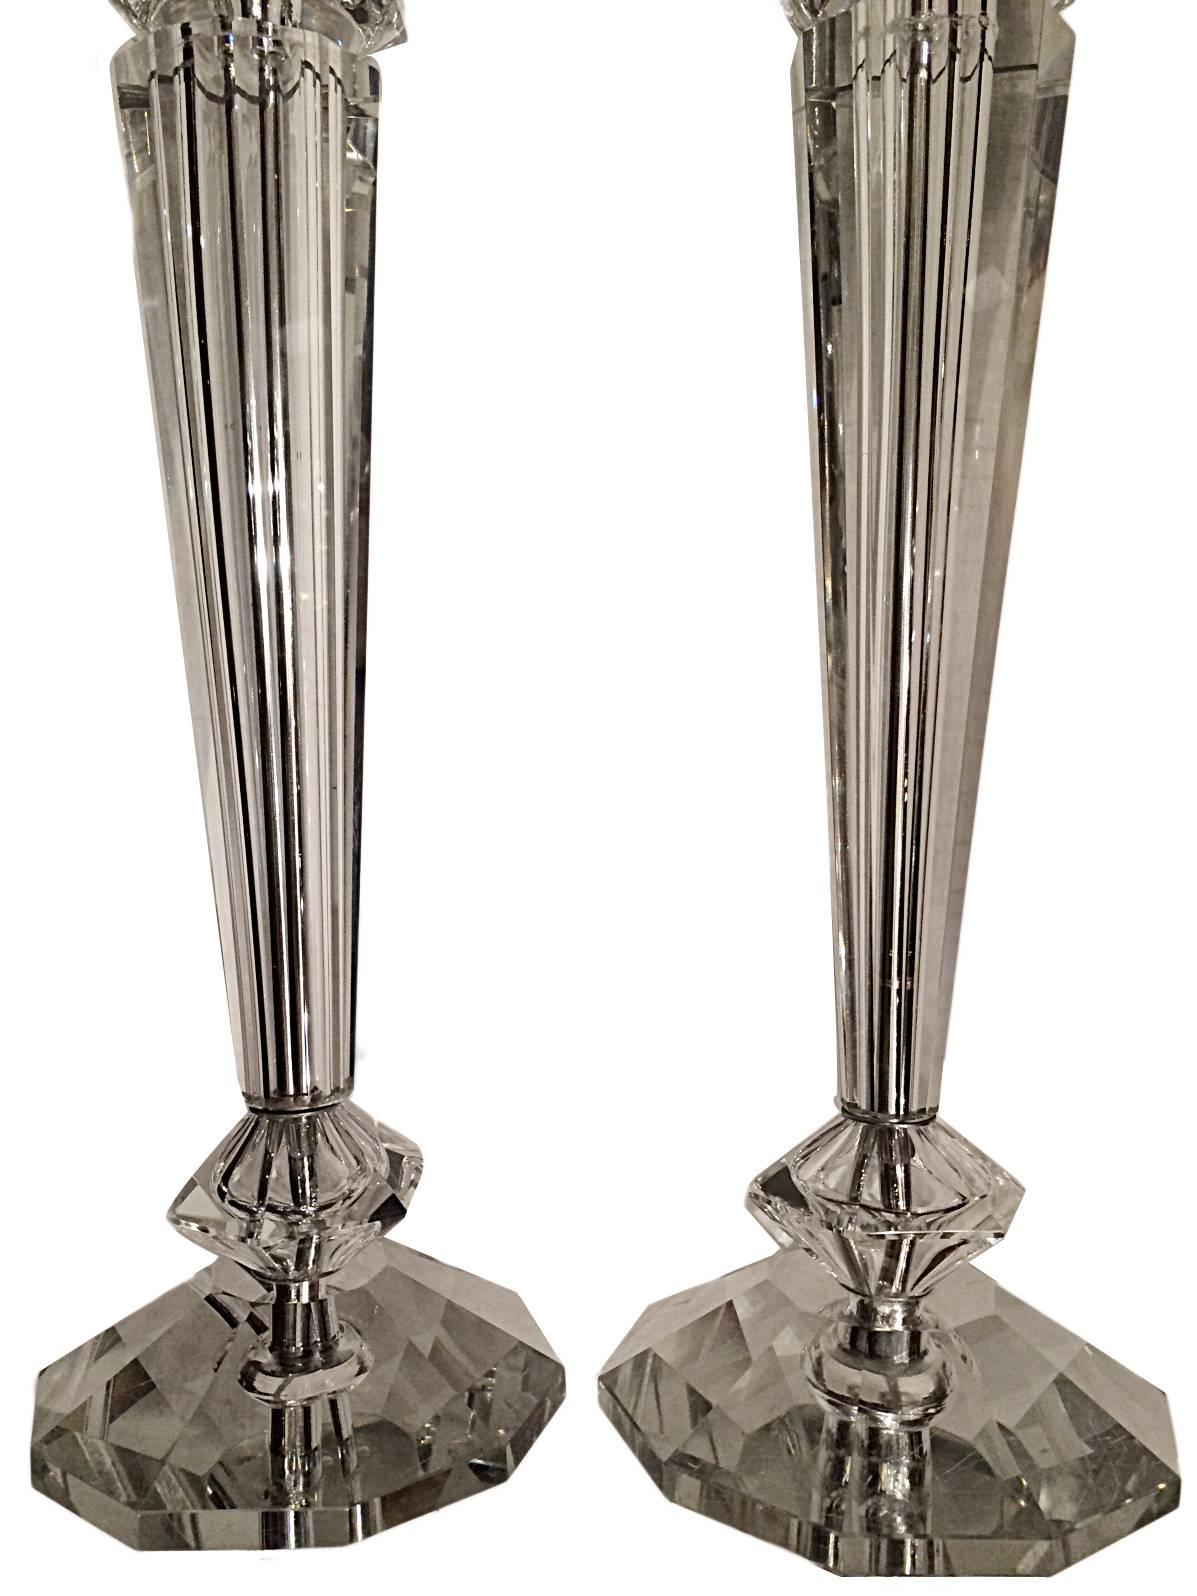 Pair of 1930s French cut-glass table lamps, column shaped.
16.5